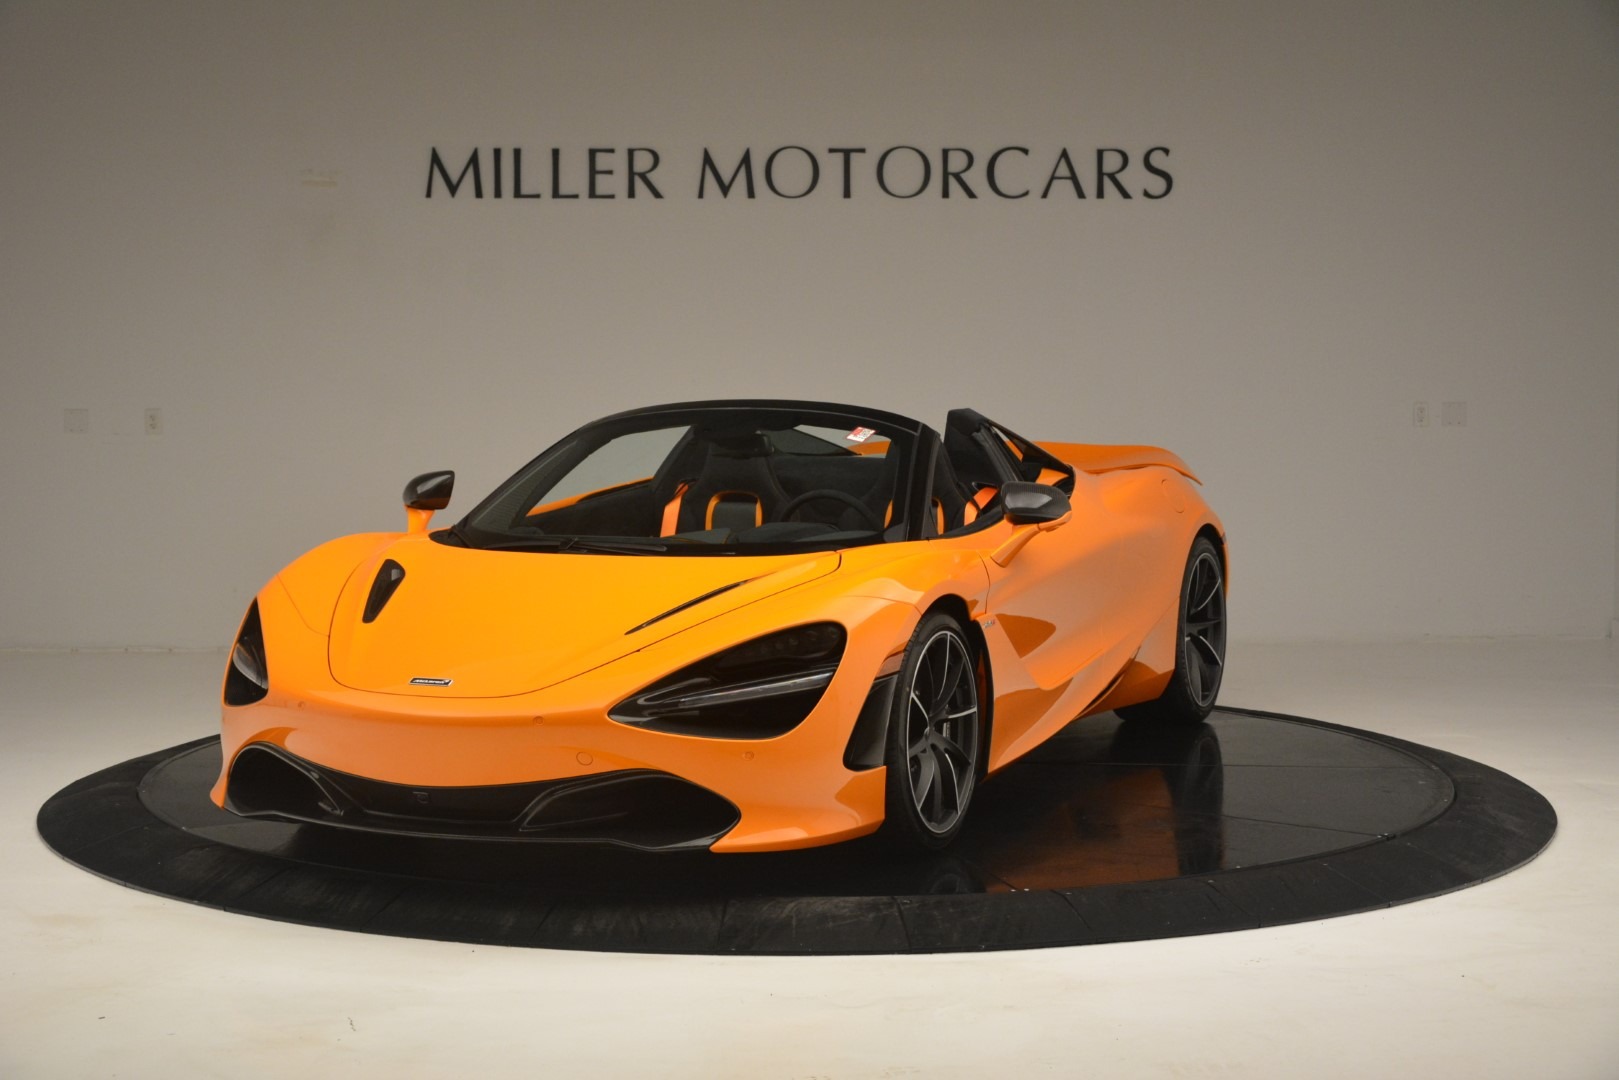 New 2020 McLaren 720S Spider for sale Sold at Rolls-Royce Motor Cars Greenwich in Greenwich CT 06830 1